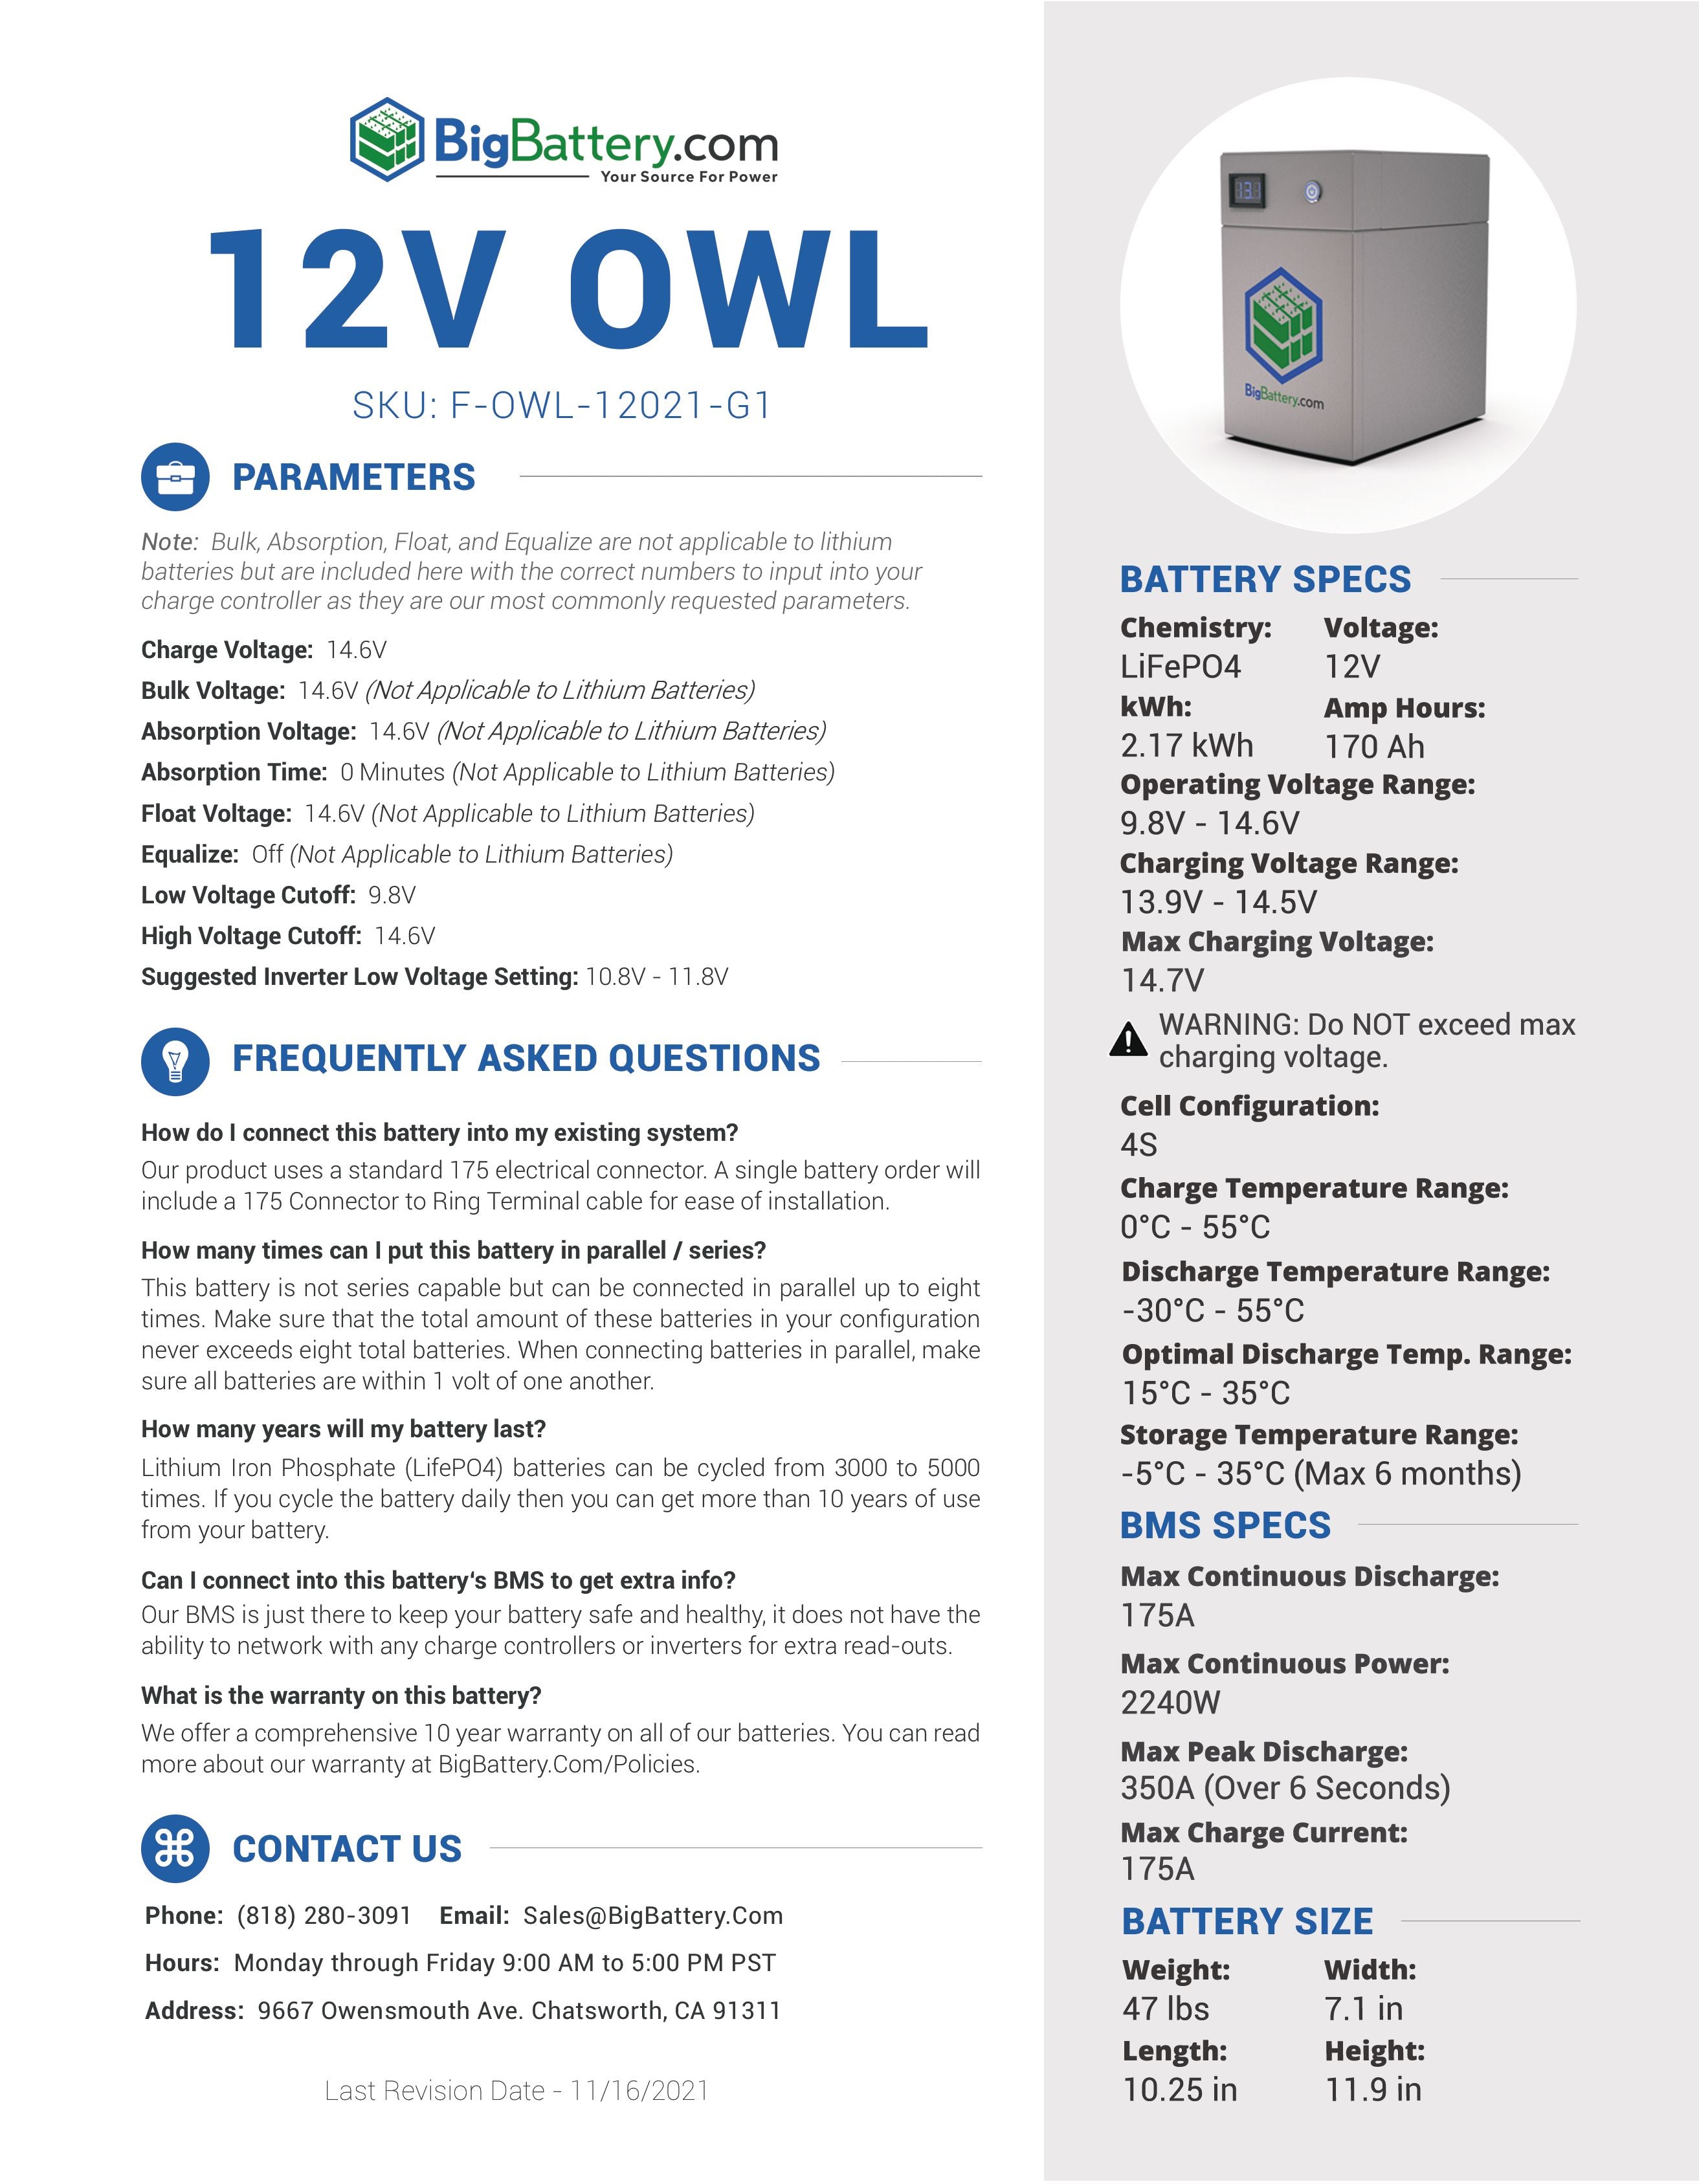 12V OWL｜170AH｜2.176KWH |  Lithium Battery Pack｜LIFEPO4 Power Block | 3-4 Weeks Ship Time